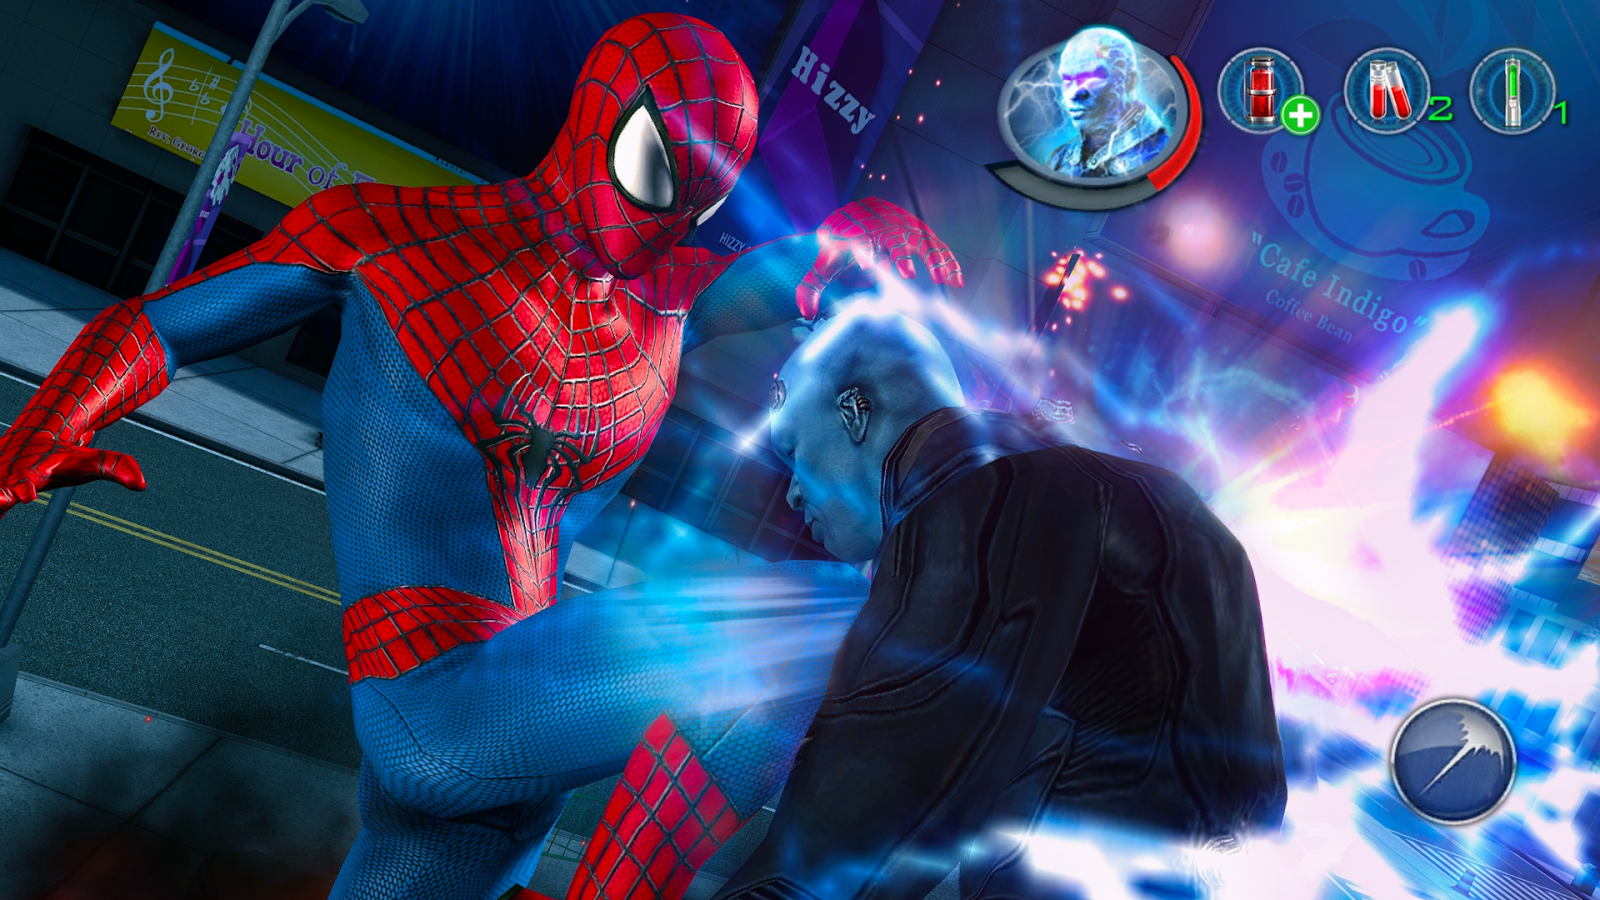 HQ The Amazing Spider-Man 2  Wallpapers | File 2127.41Kb